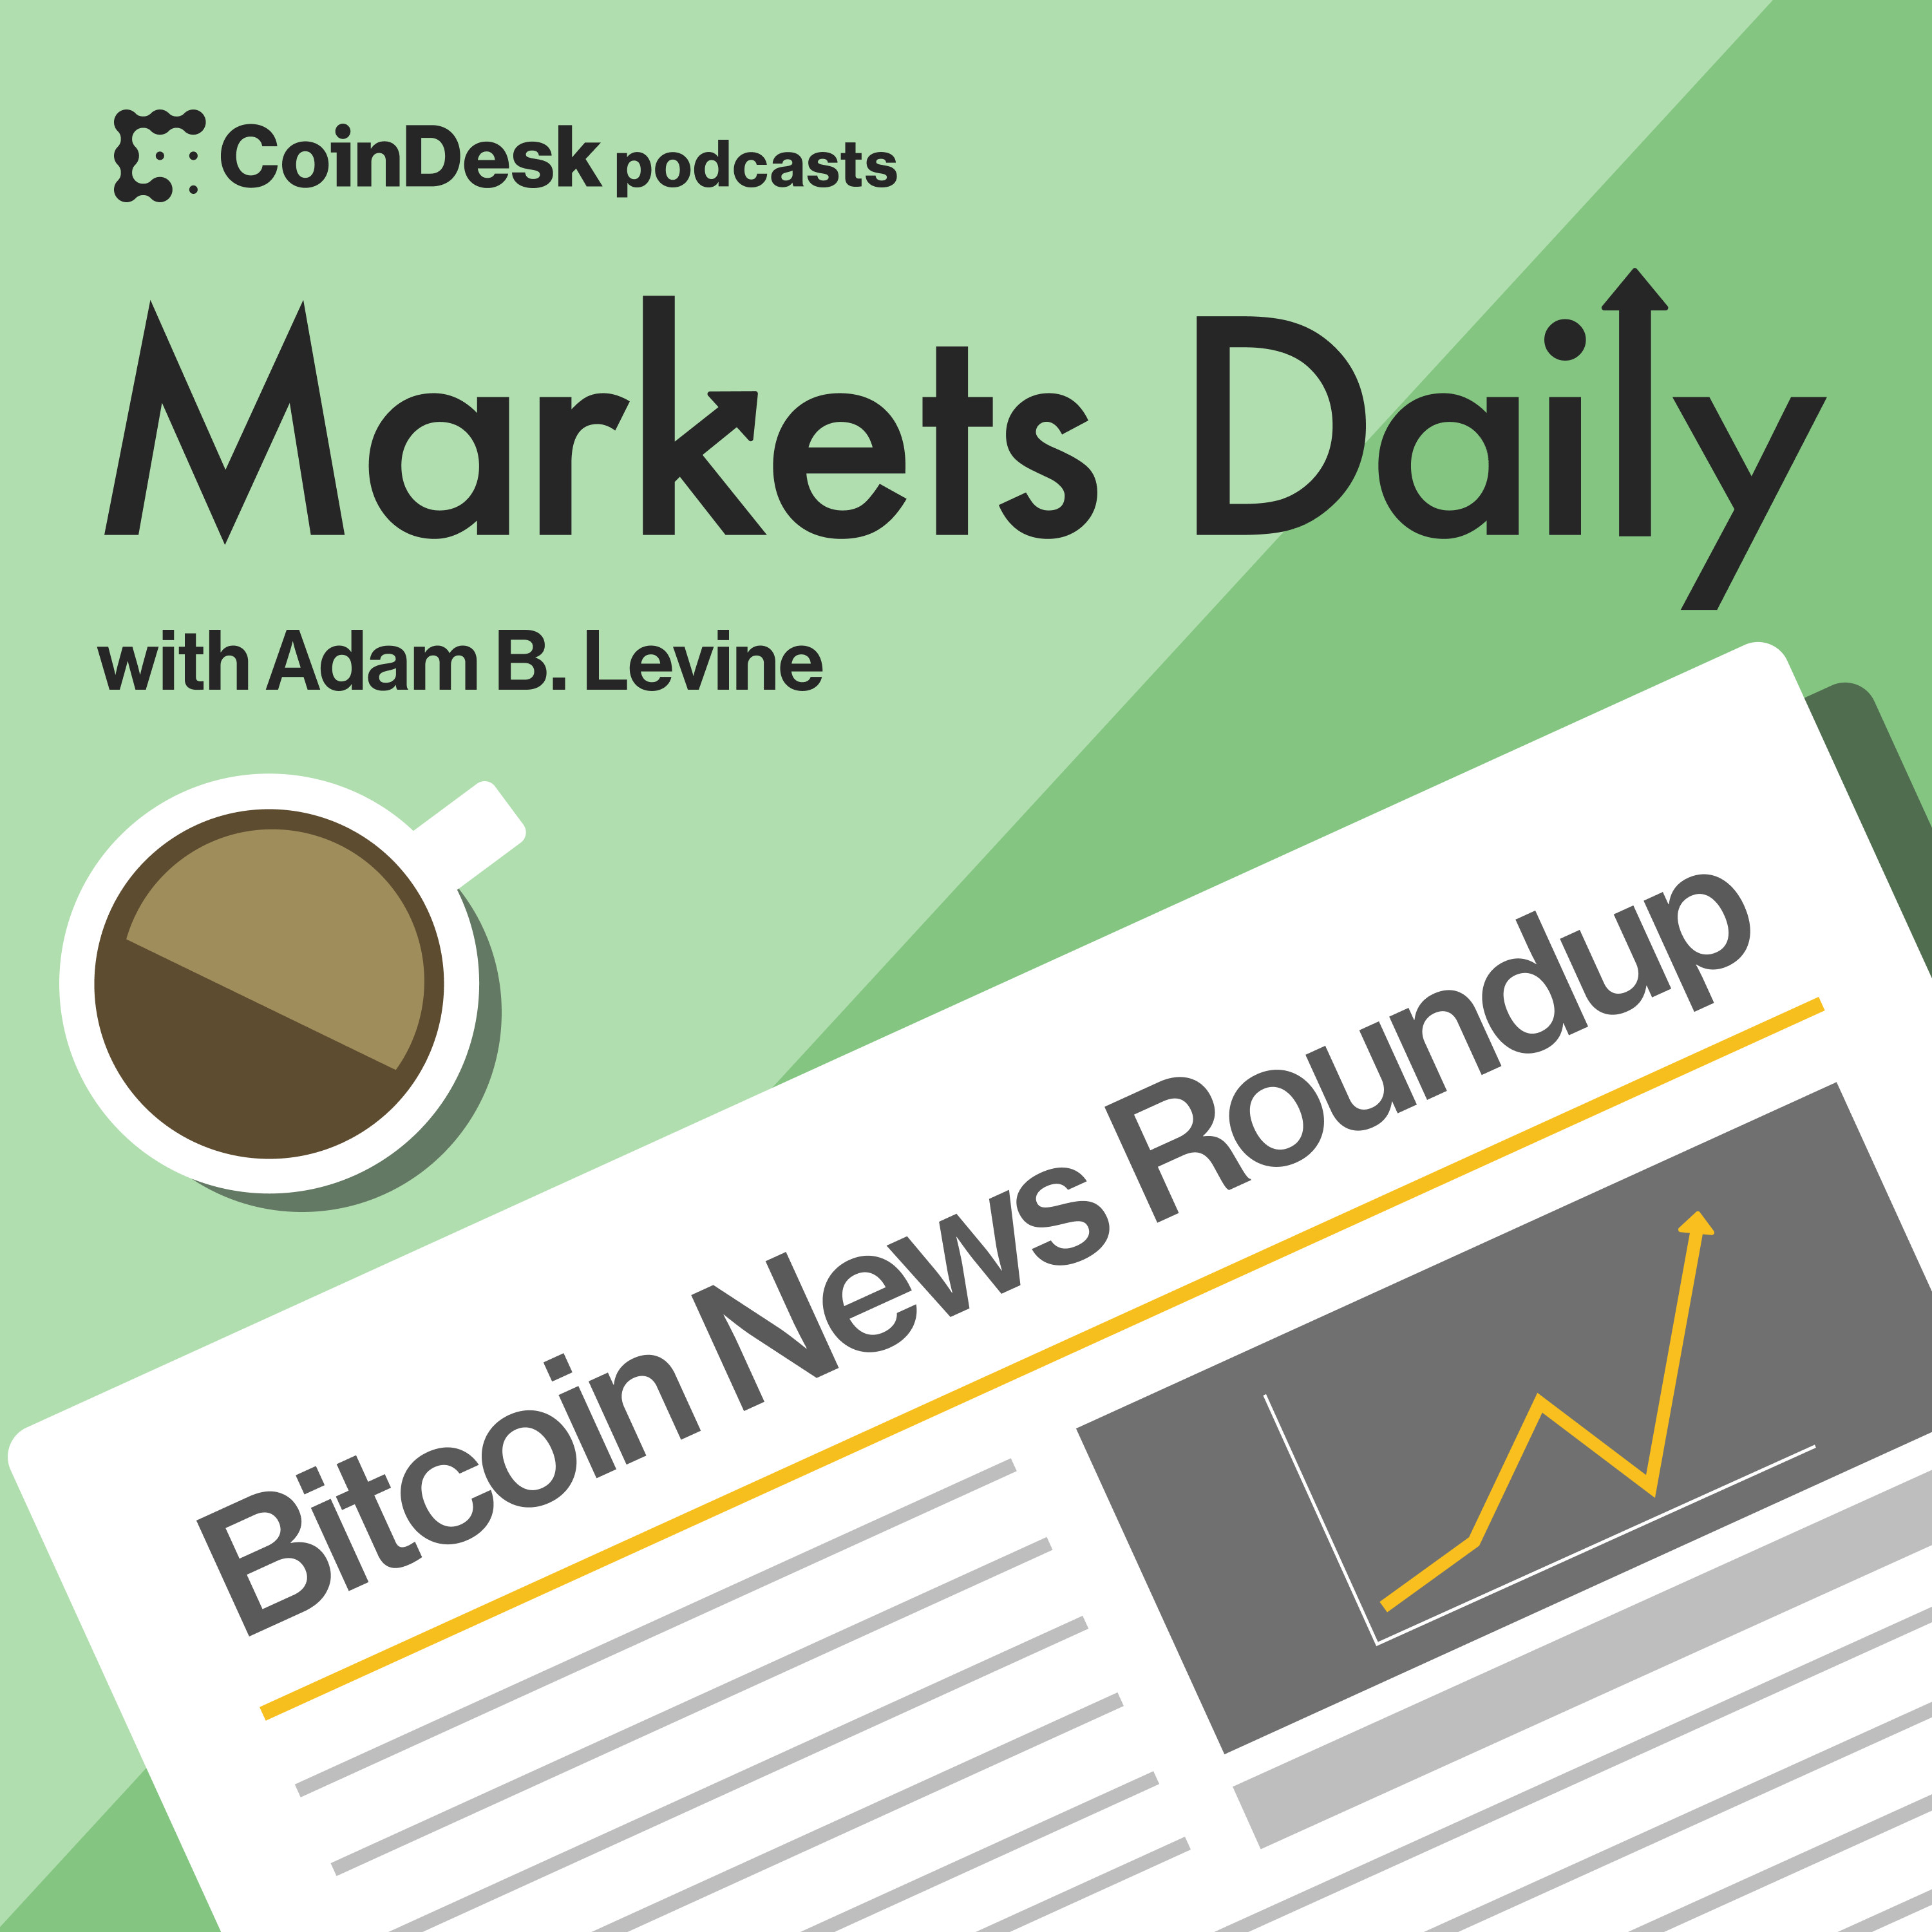 Fresh update on "ibm" discussed on Markets Daily Crypto Roundup